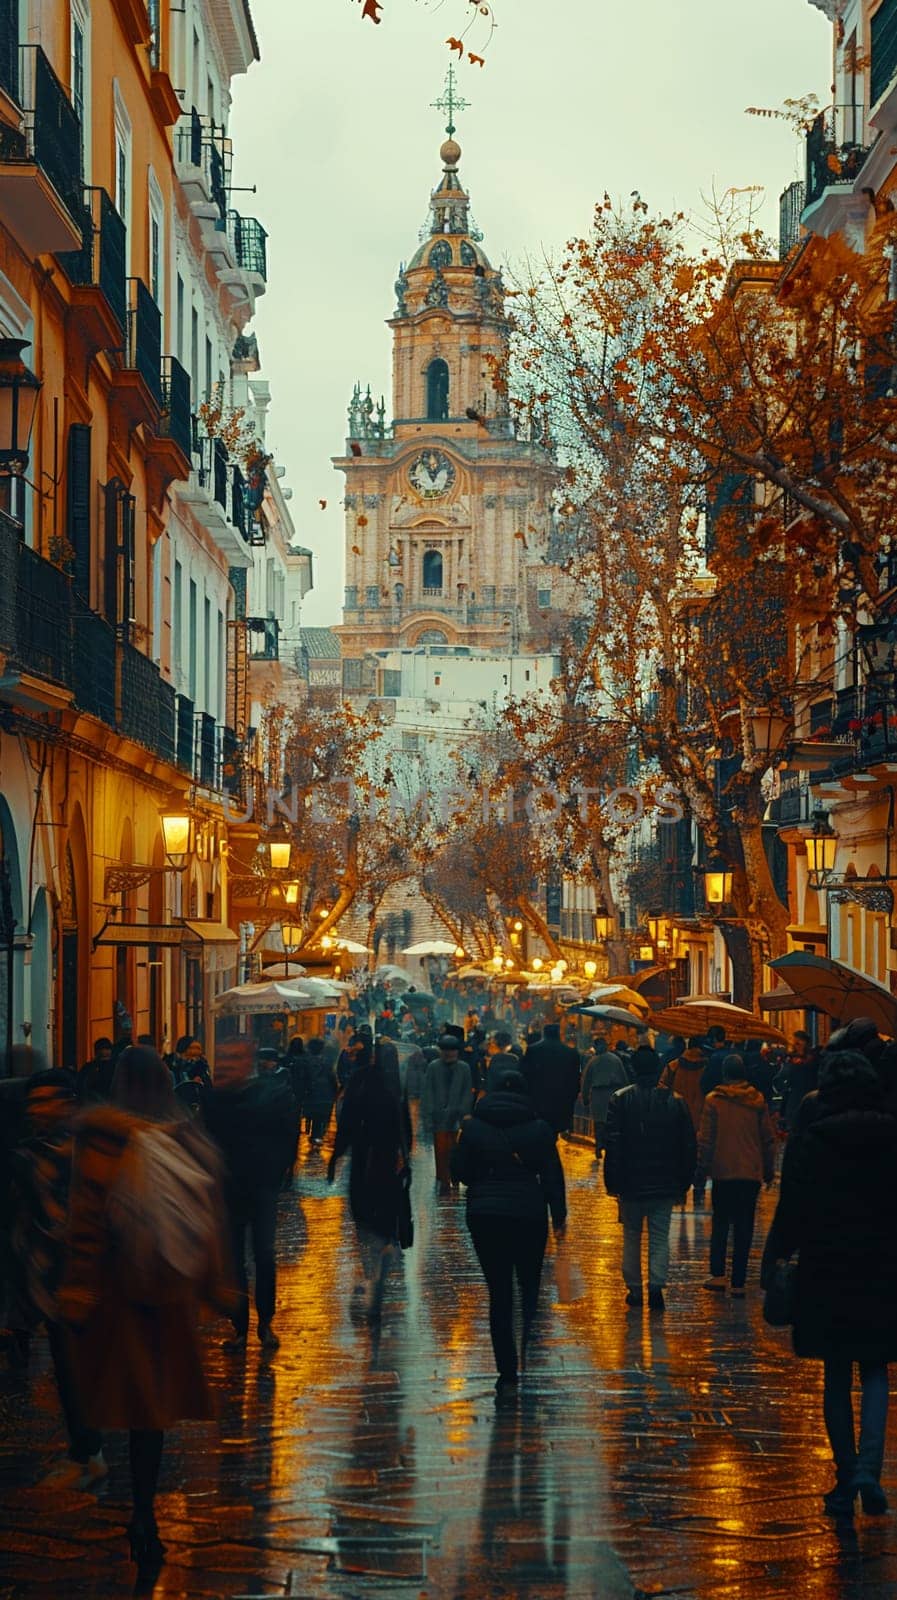 Cobbled Streets of a Historic City Center with Tourists Exploring, The blur of foot traffic against old buildings suggests the ongoing dance of history and modernity.